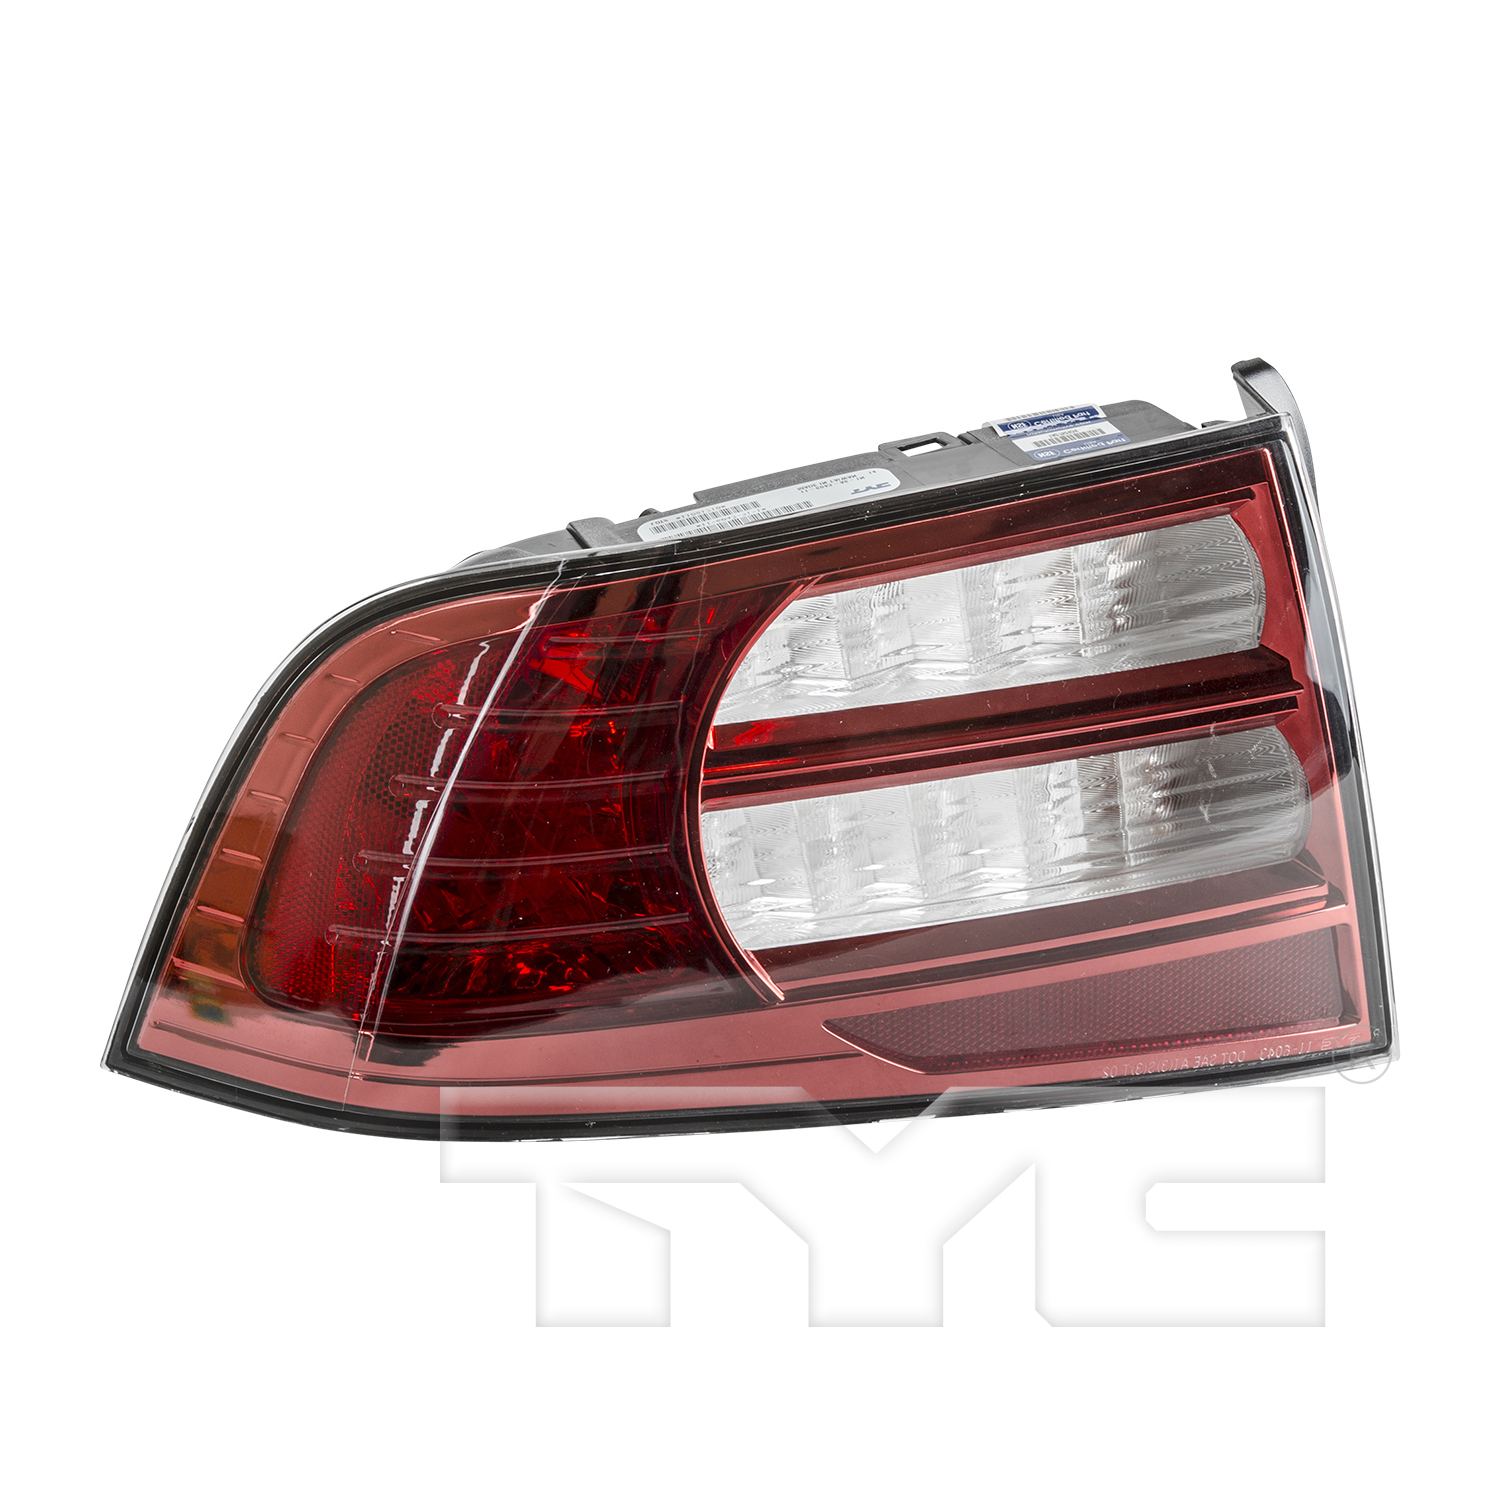 Aftermarket TAILLIGHTS for ACURA - TL, TL,07-08,LT Taillamp lens/housing